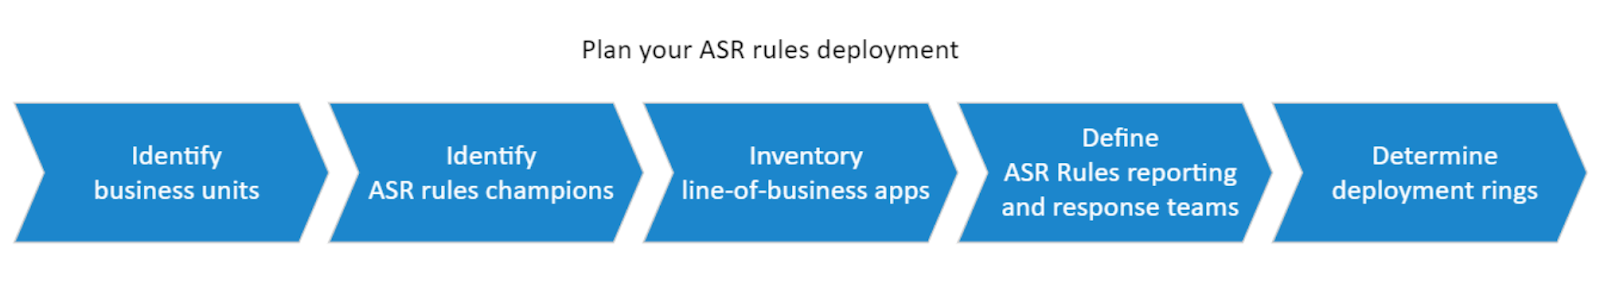 Microsoft’s recommended process for ASR configuration